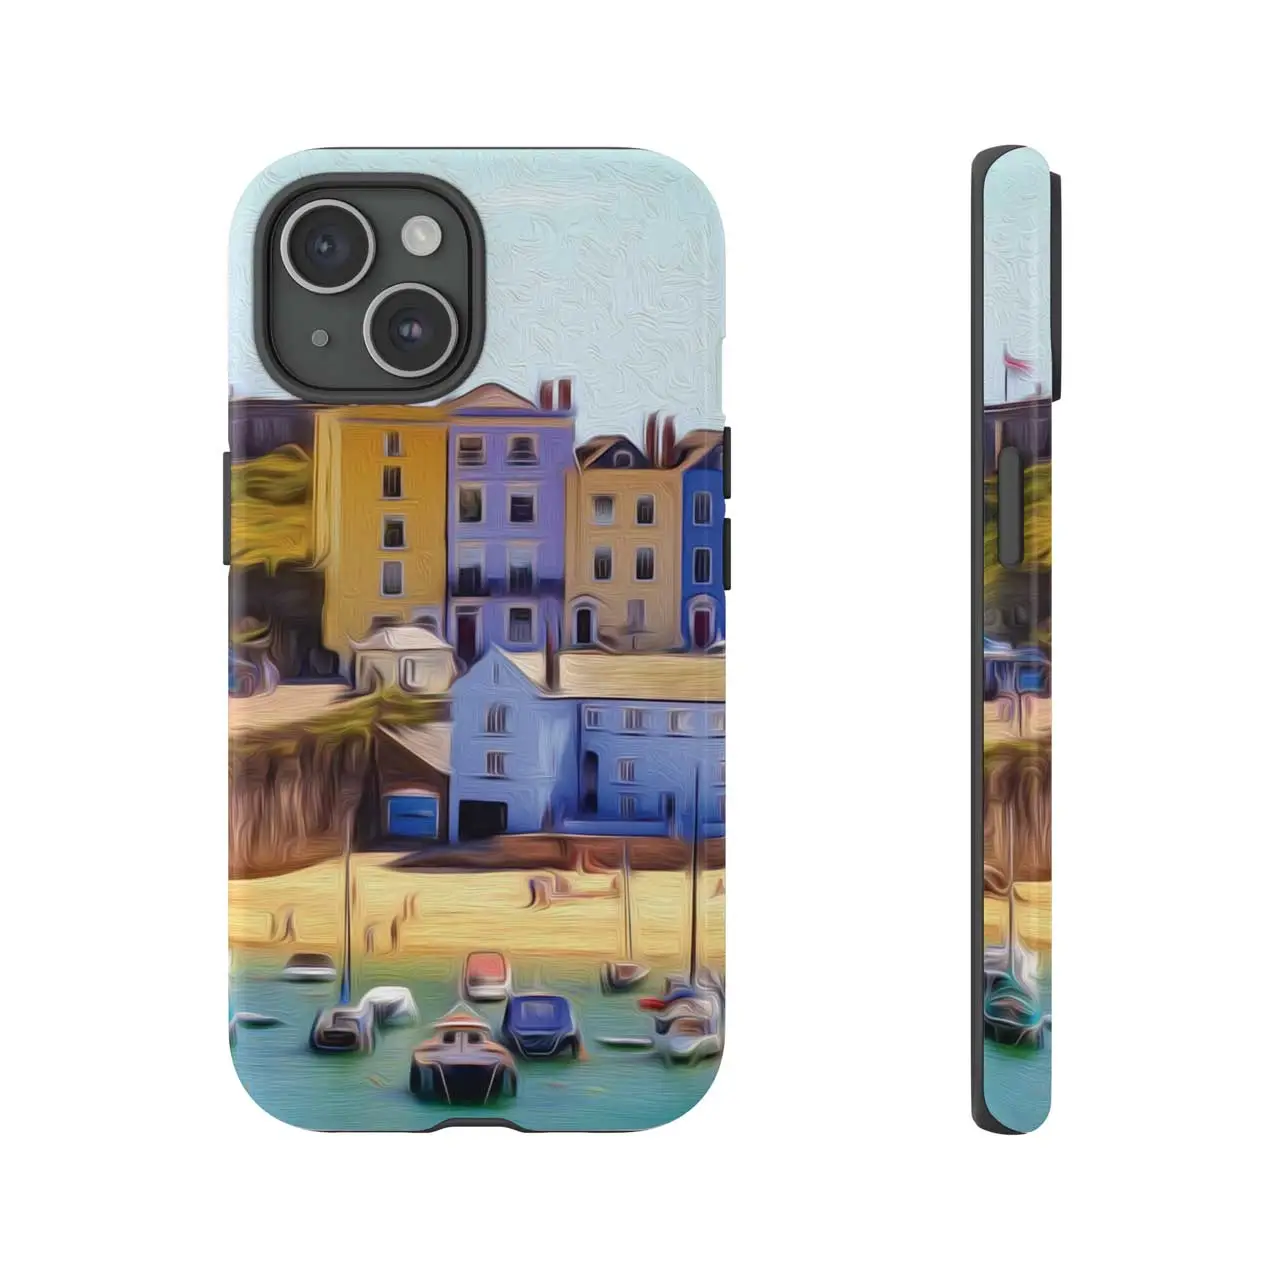 Around Tenby Tough Smartphone Case Small Tenby Harbour Beach